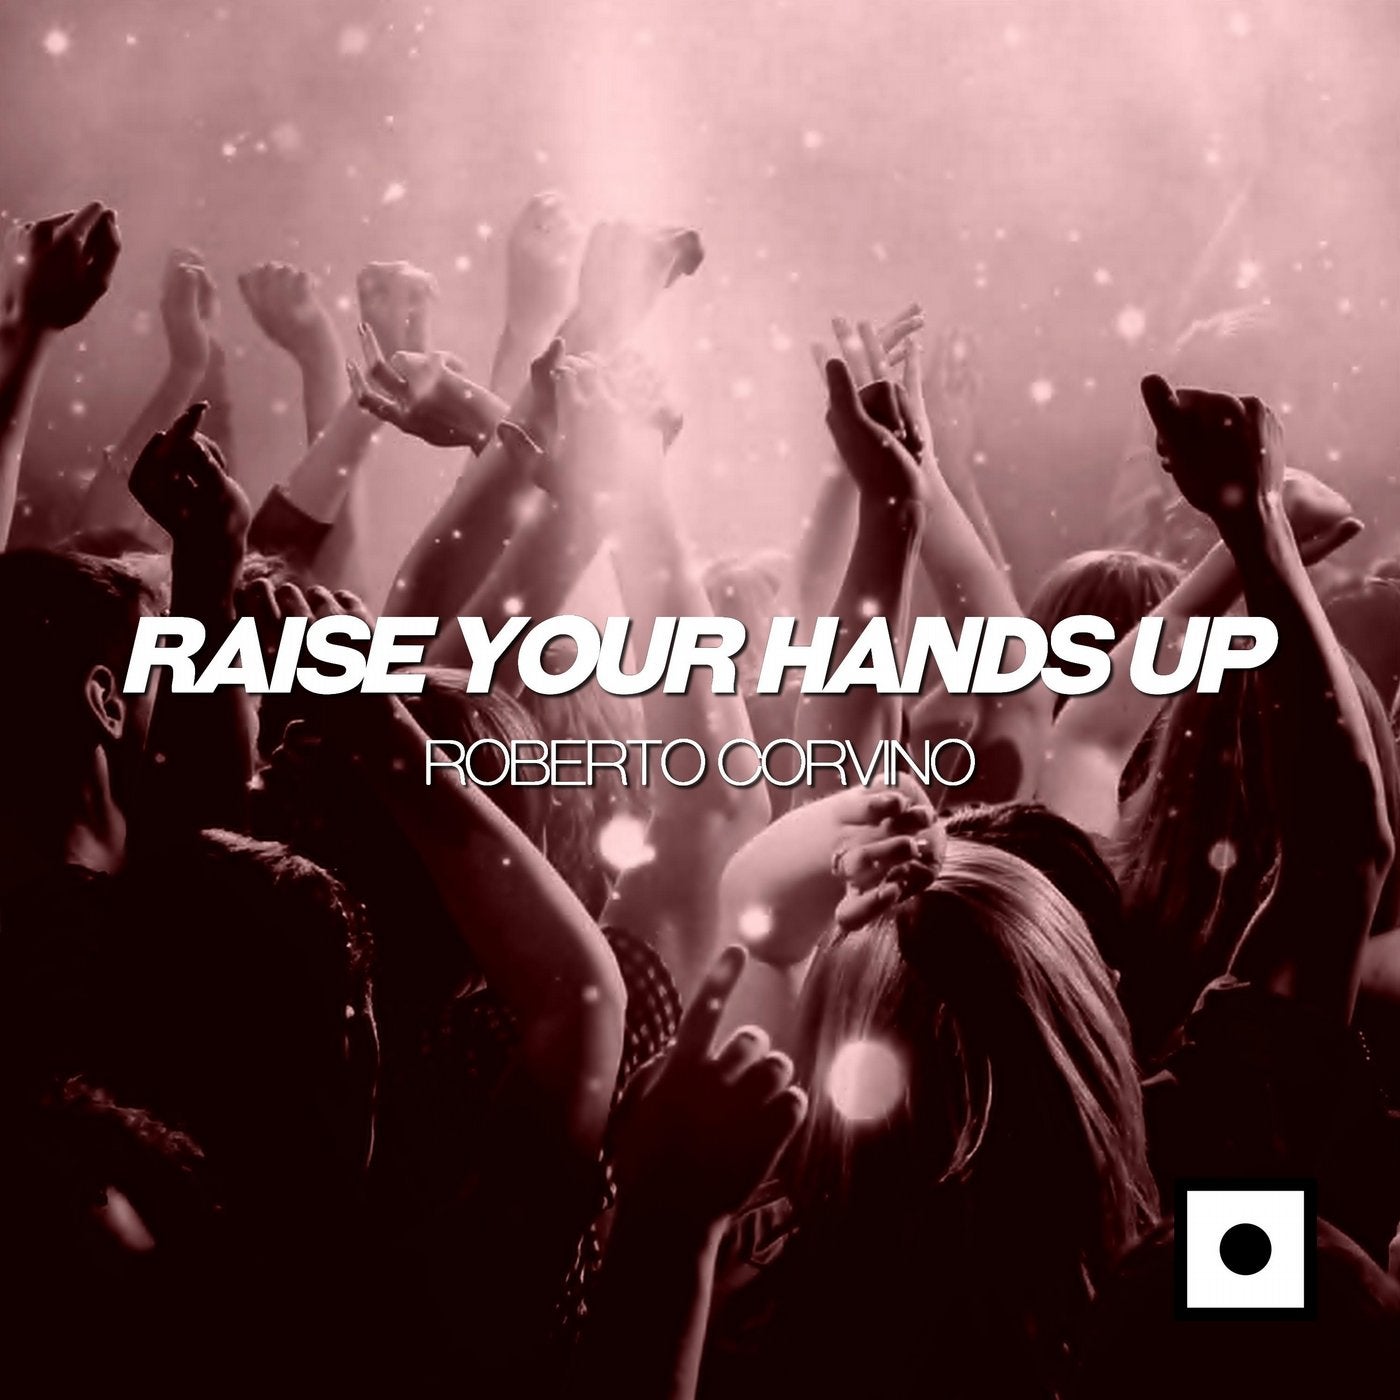 Raise Your Hands Up